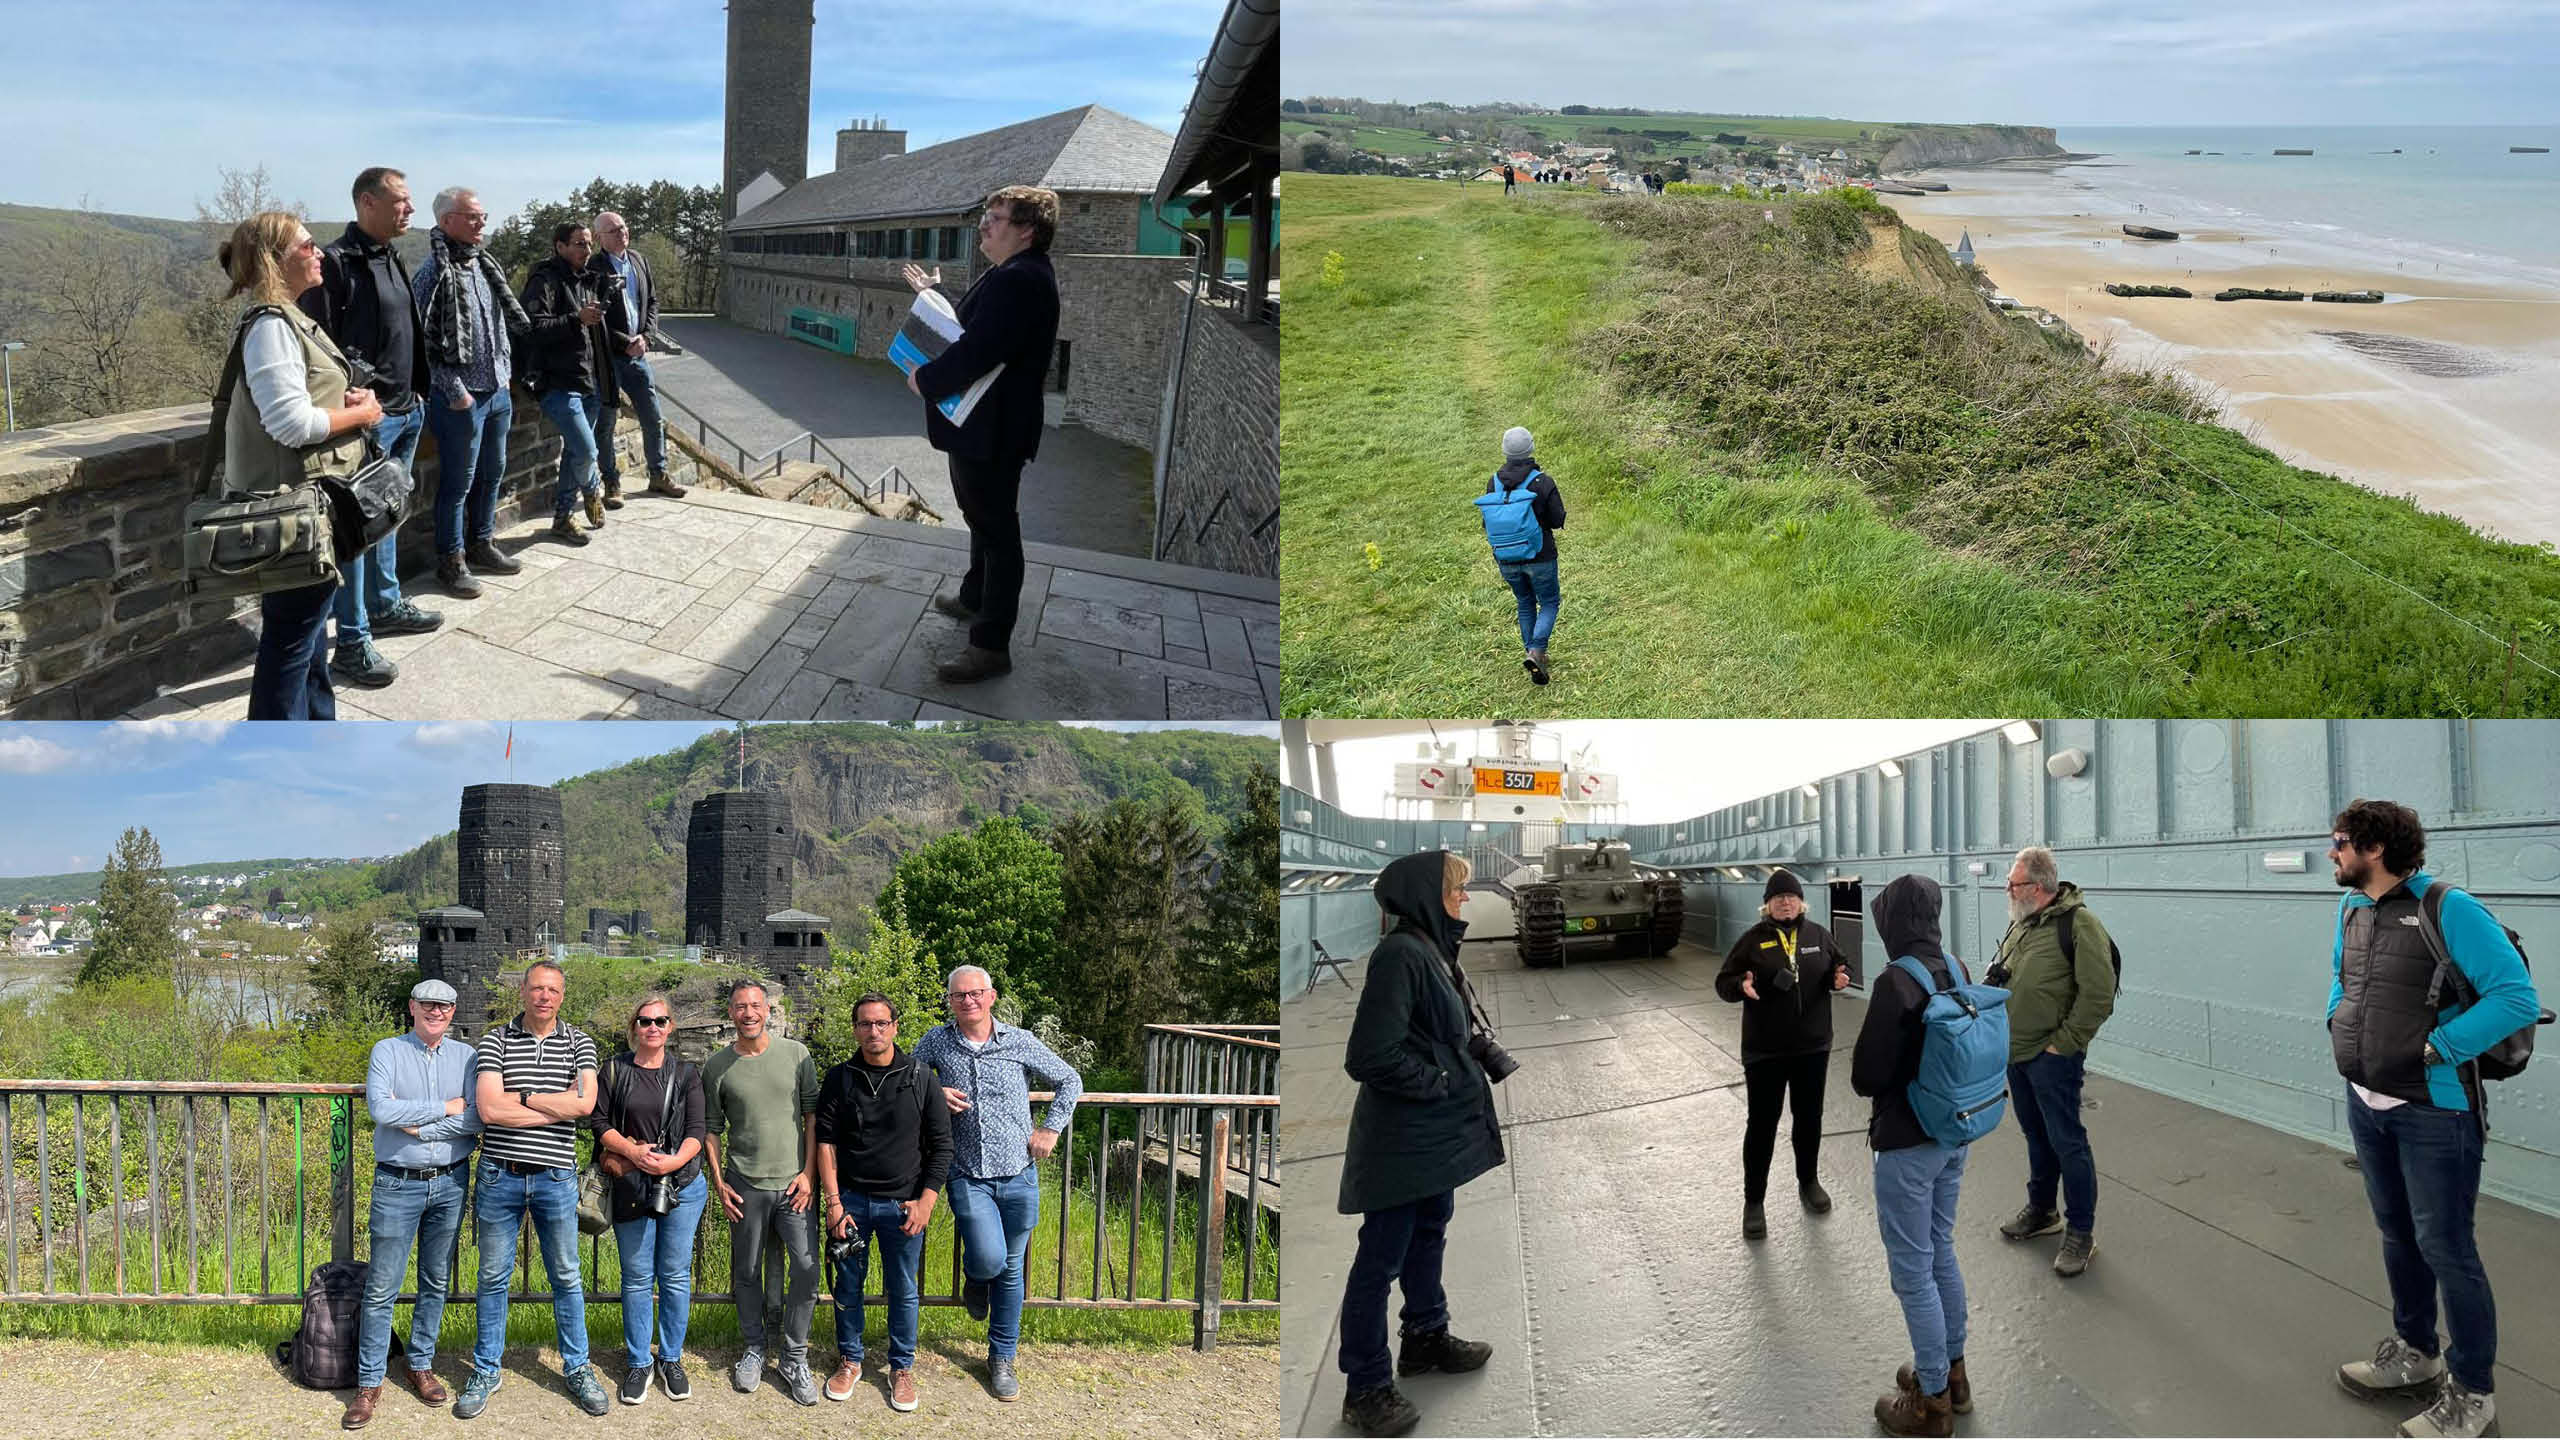 Two press trips to promote the Liberation Route Europe